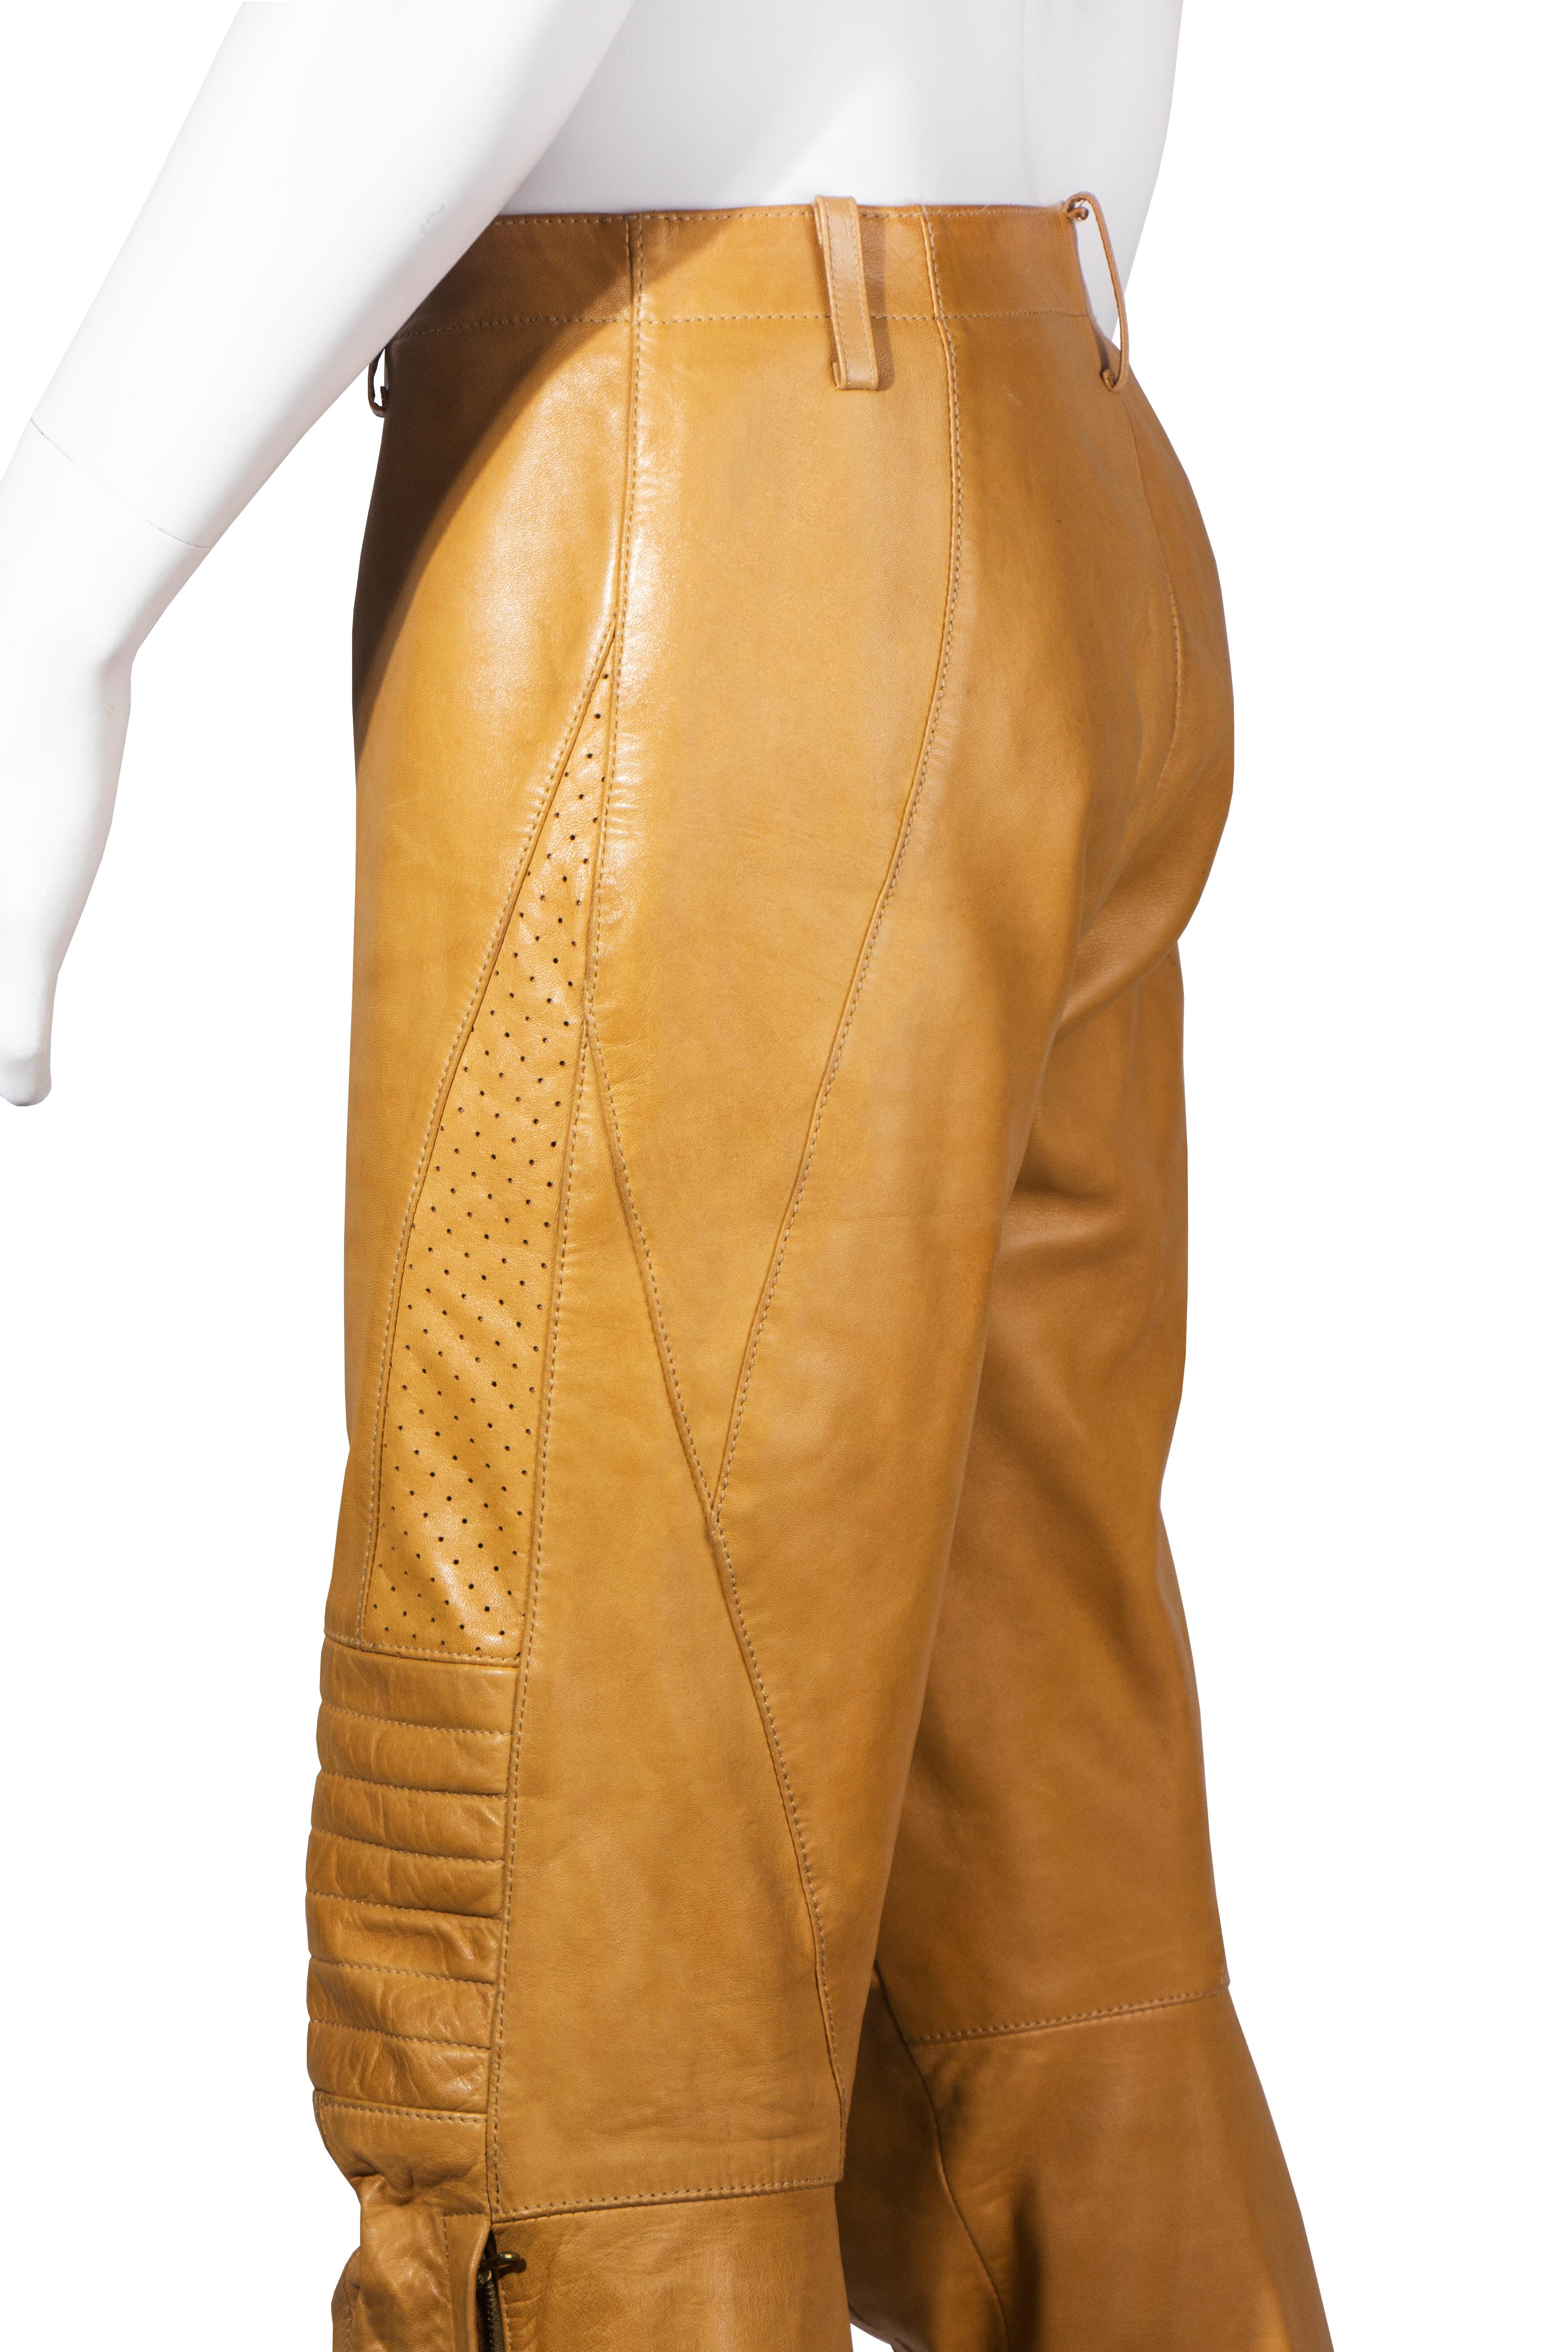 Gucci by Tom Ford men's tan leather motorcycle pants, fw 2000 For Sale 2